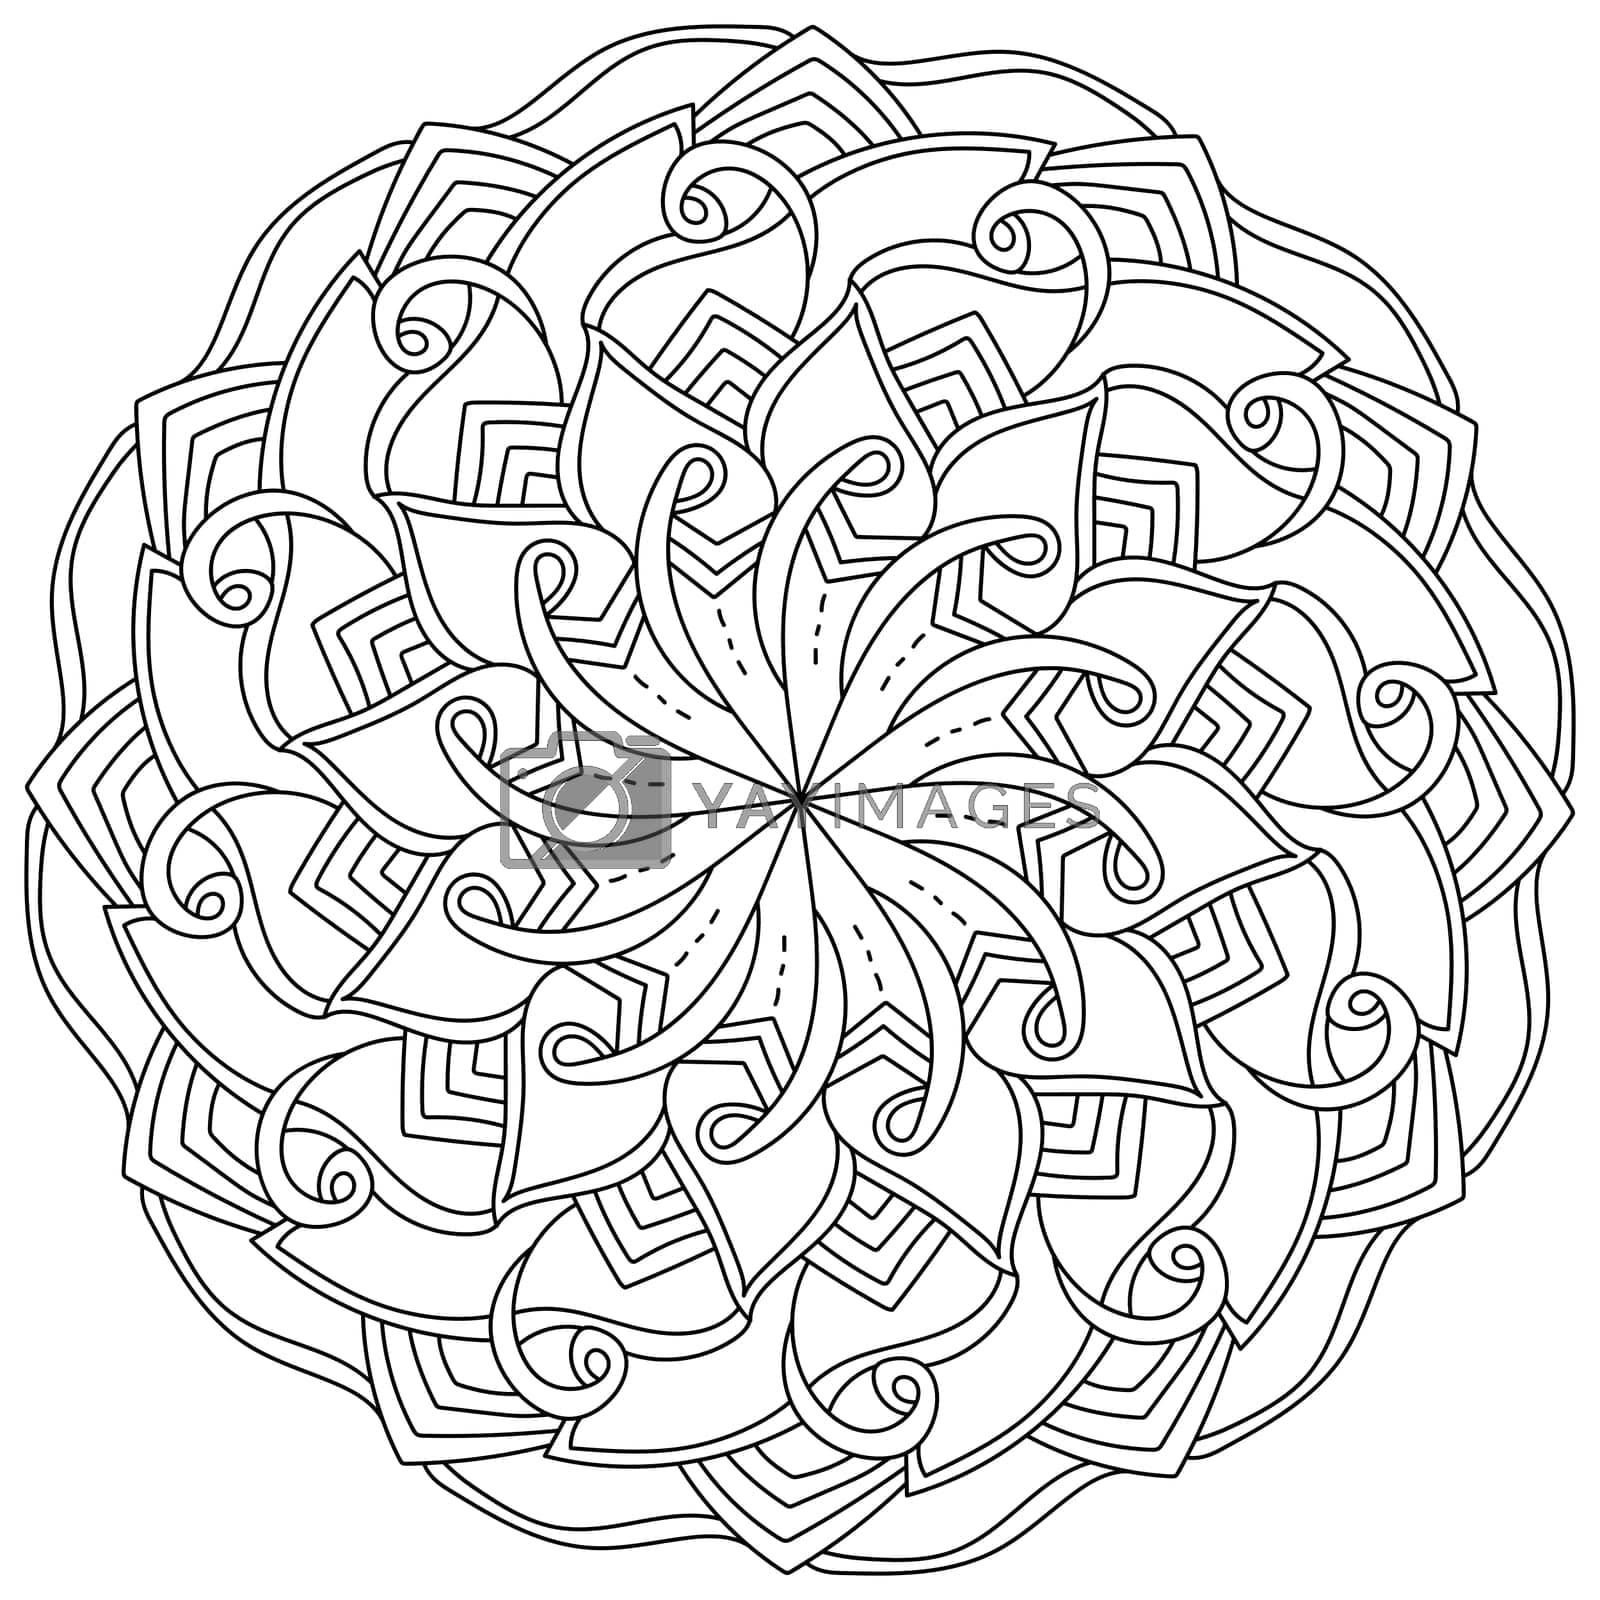 Royalty free image of Contour mandala with petals and curls, meditative coloring book page for adults and kids by Sunny_Coloring